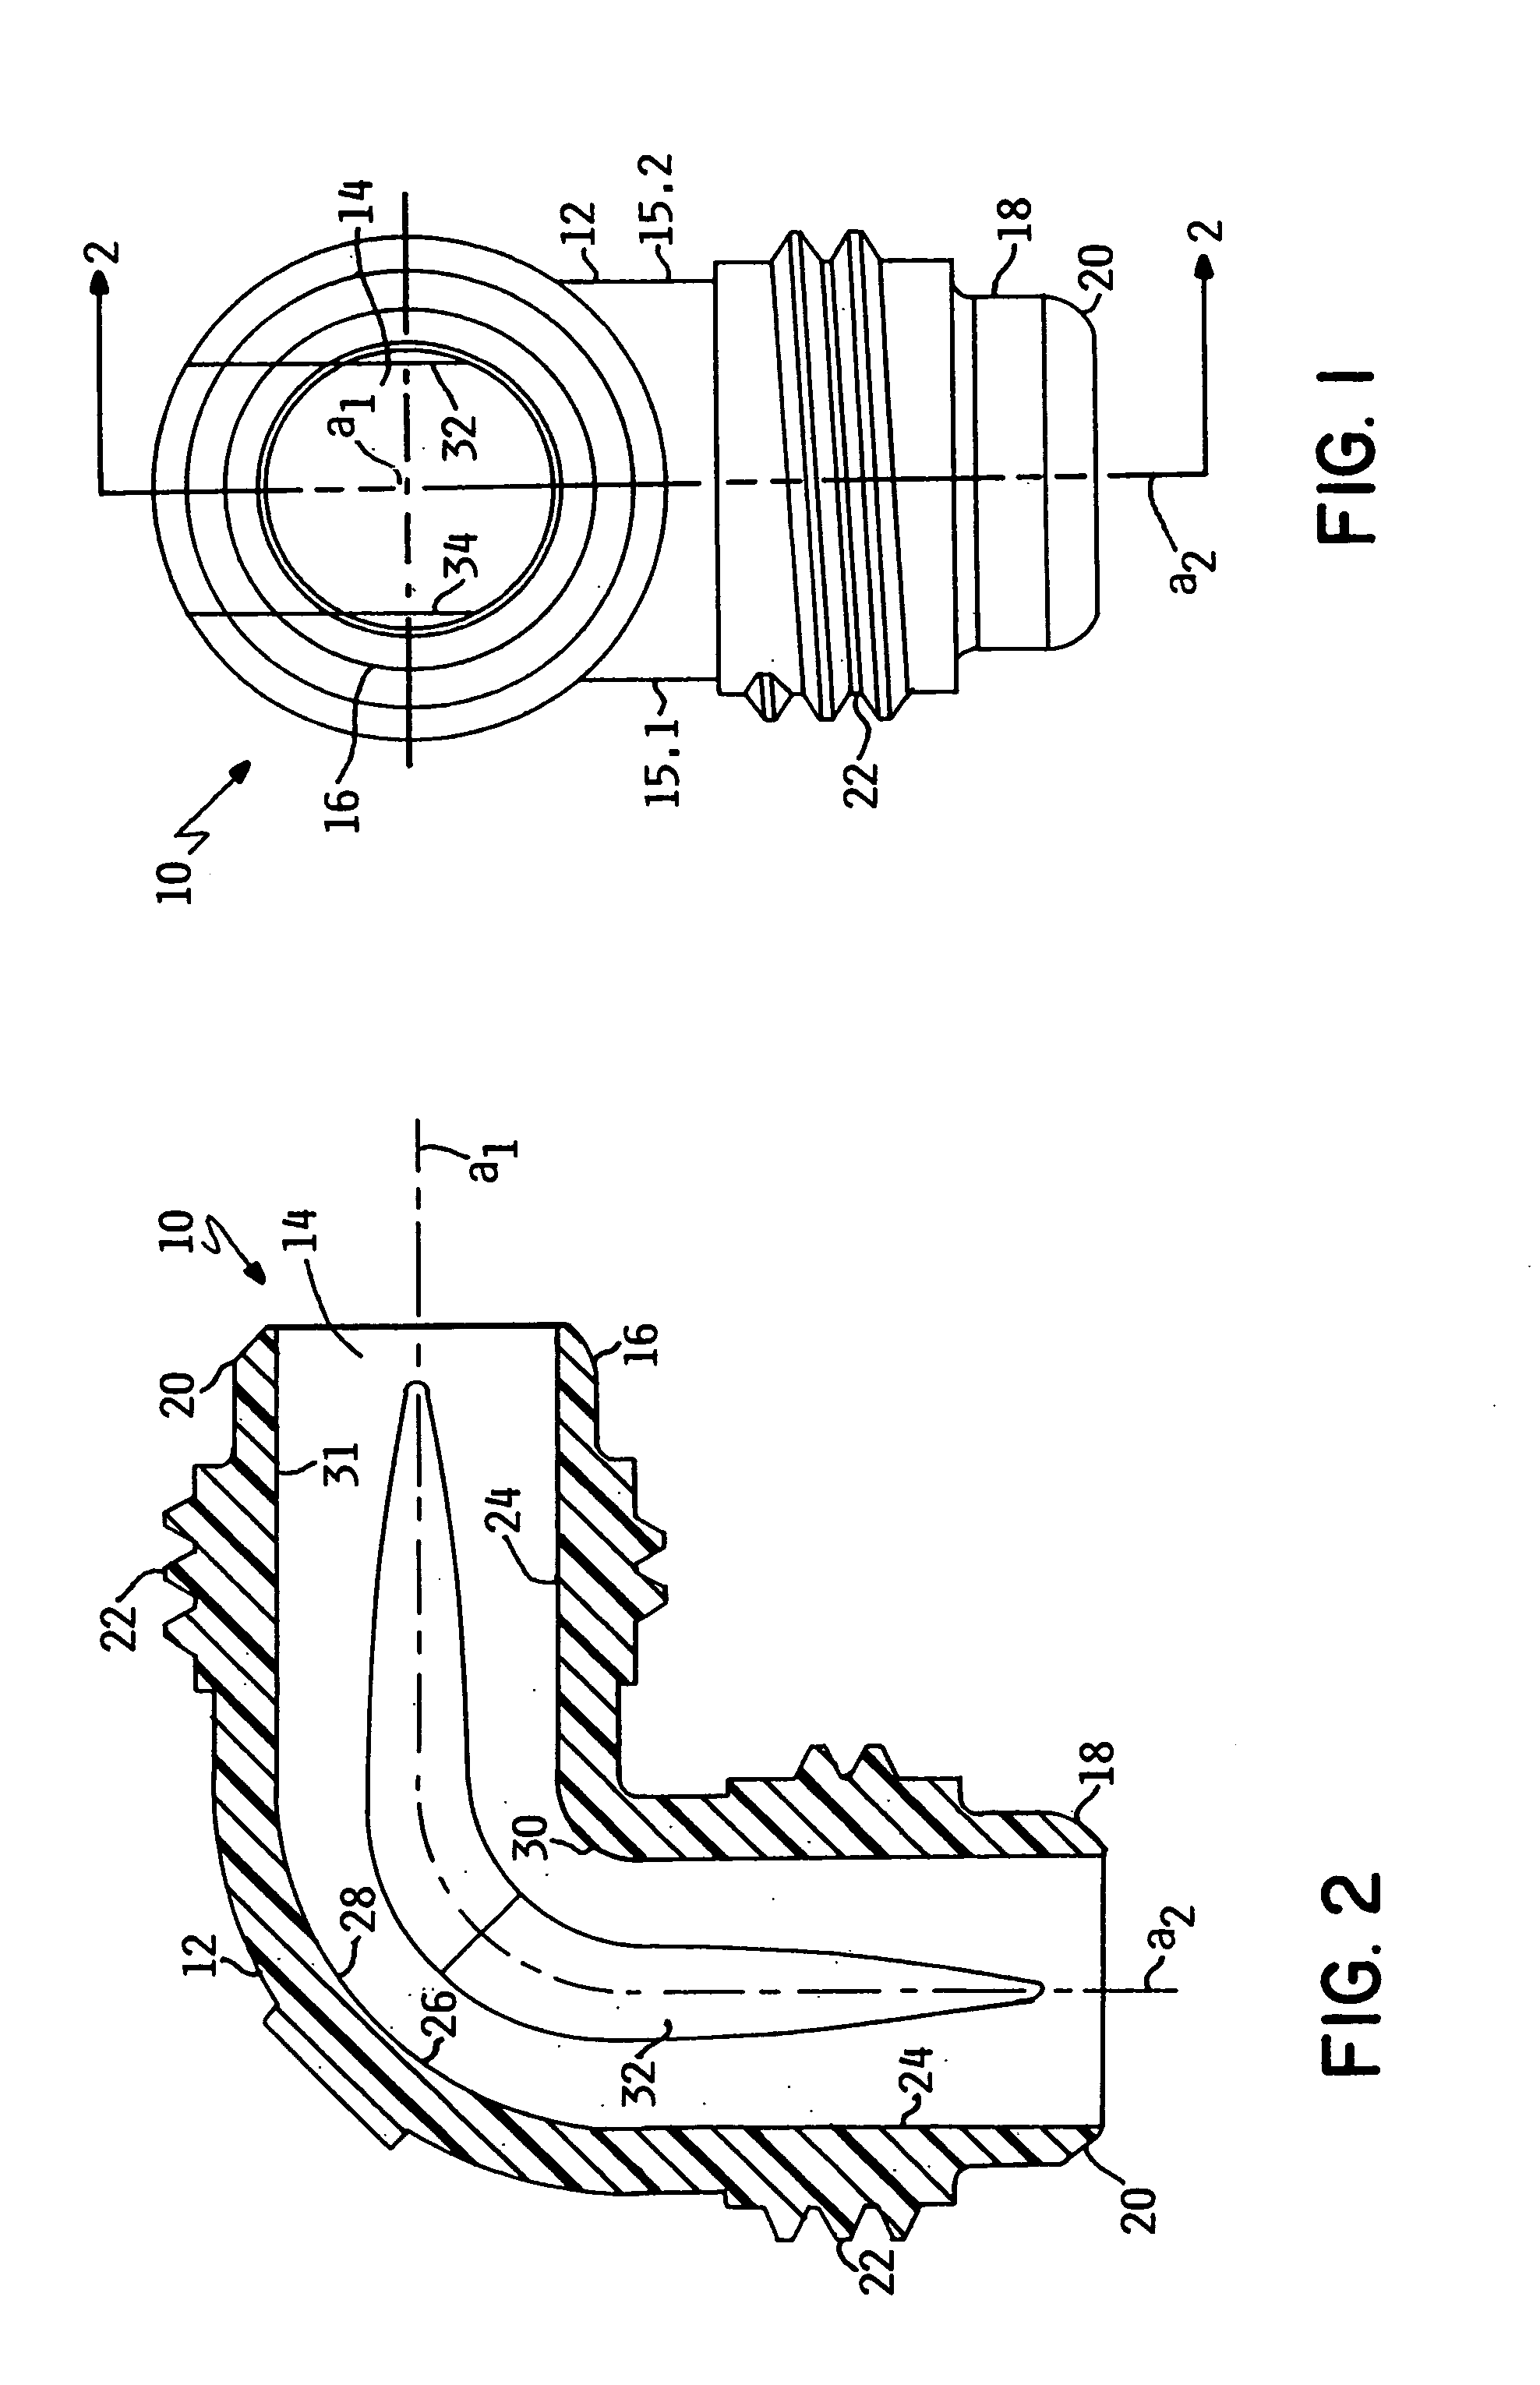 Process and apparatus for molding polymer fittings